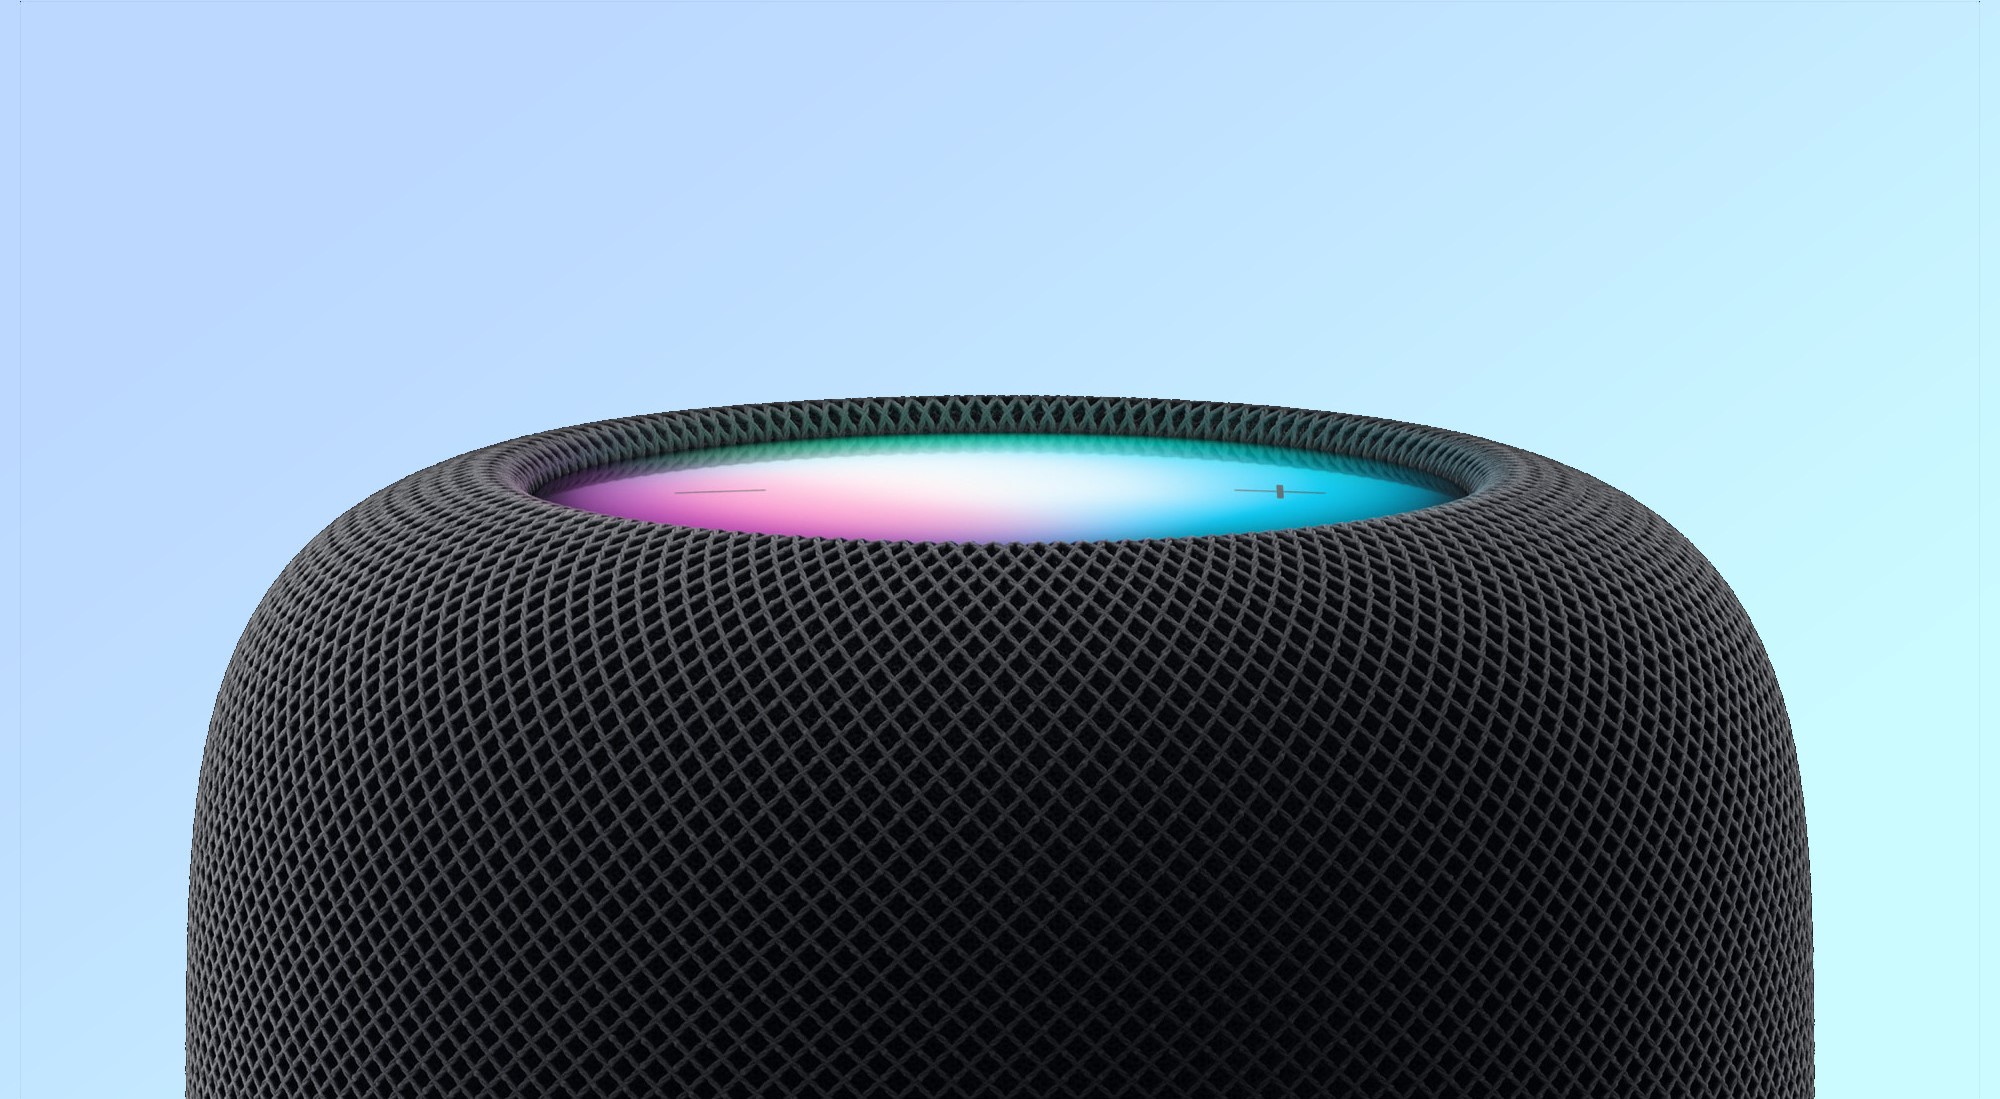 Apple HomePod 2nd Generation Review: A Smart Speaker With Big Bass